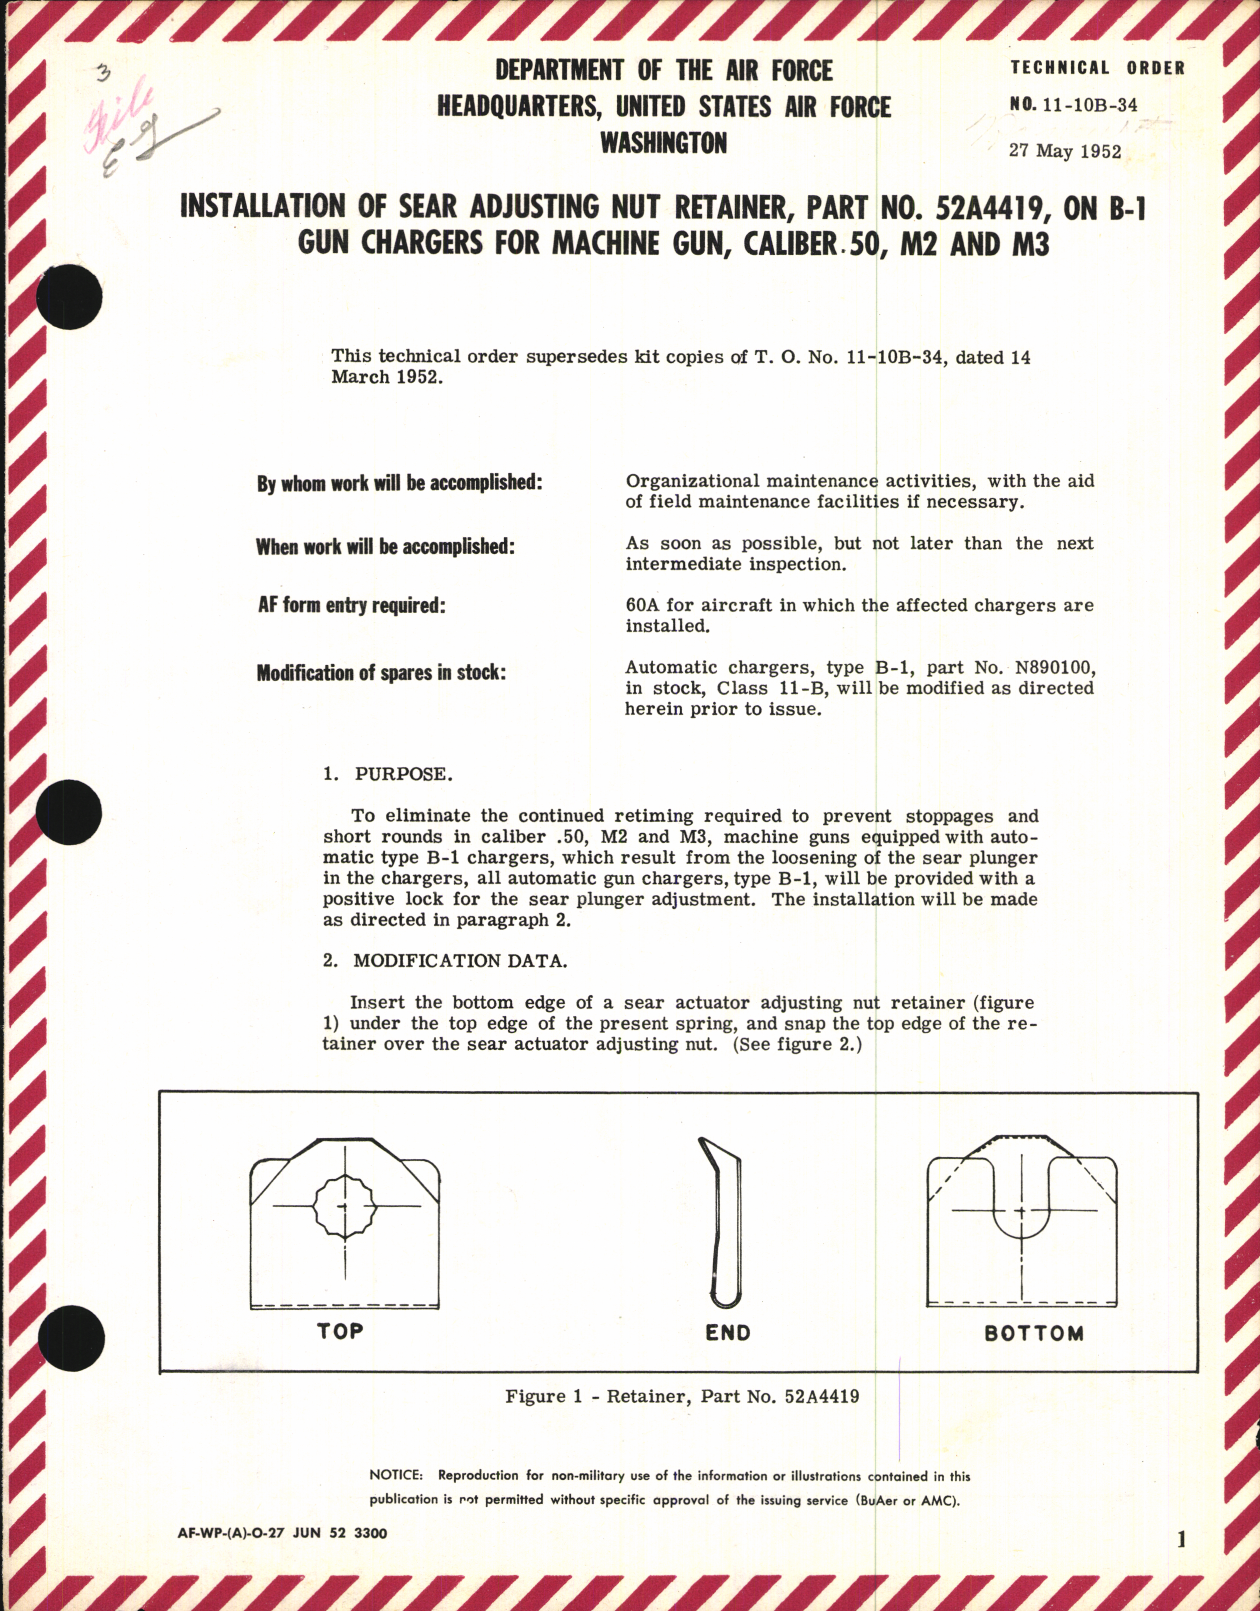 Sample page 1 from AirCorps Library document: Installation of Sear Adjusting Nut Retainer for Caliber .50, M2 and M3 on B-1 Gun Chargers for Machine Gun